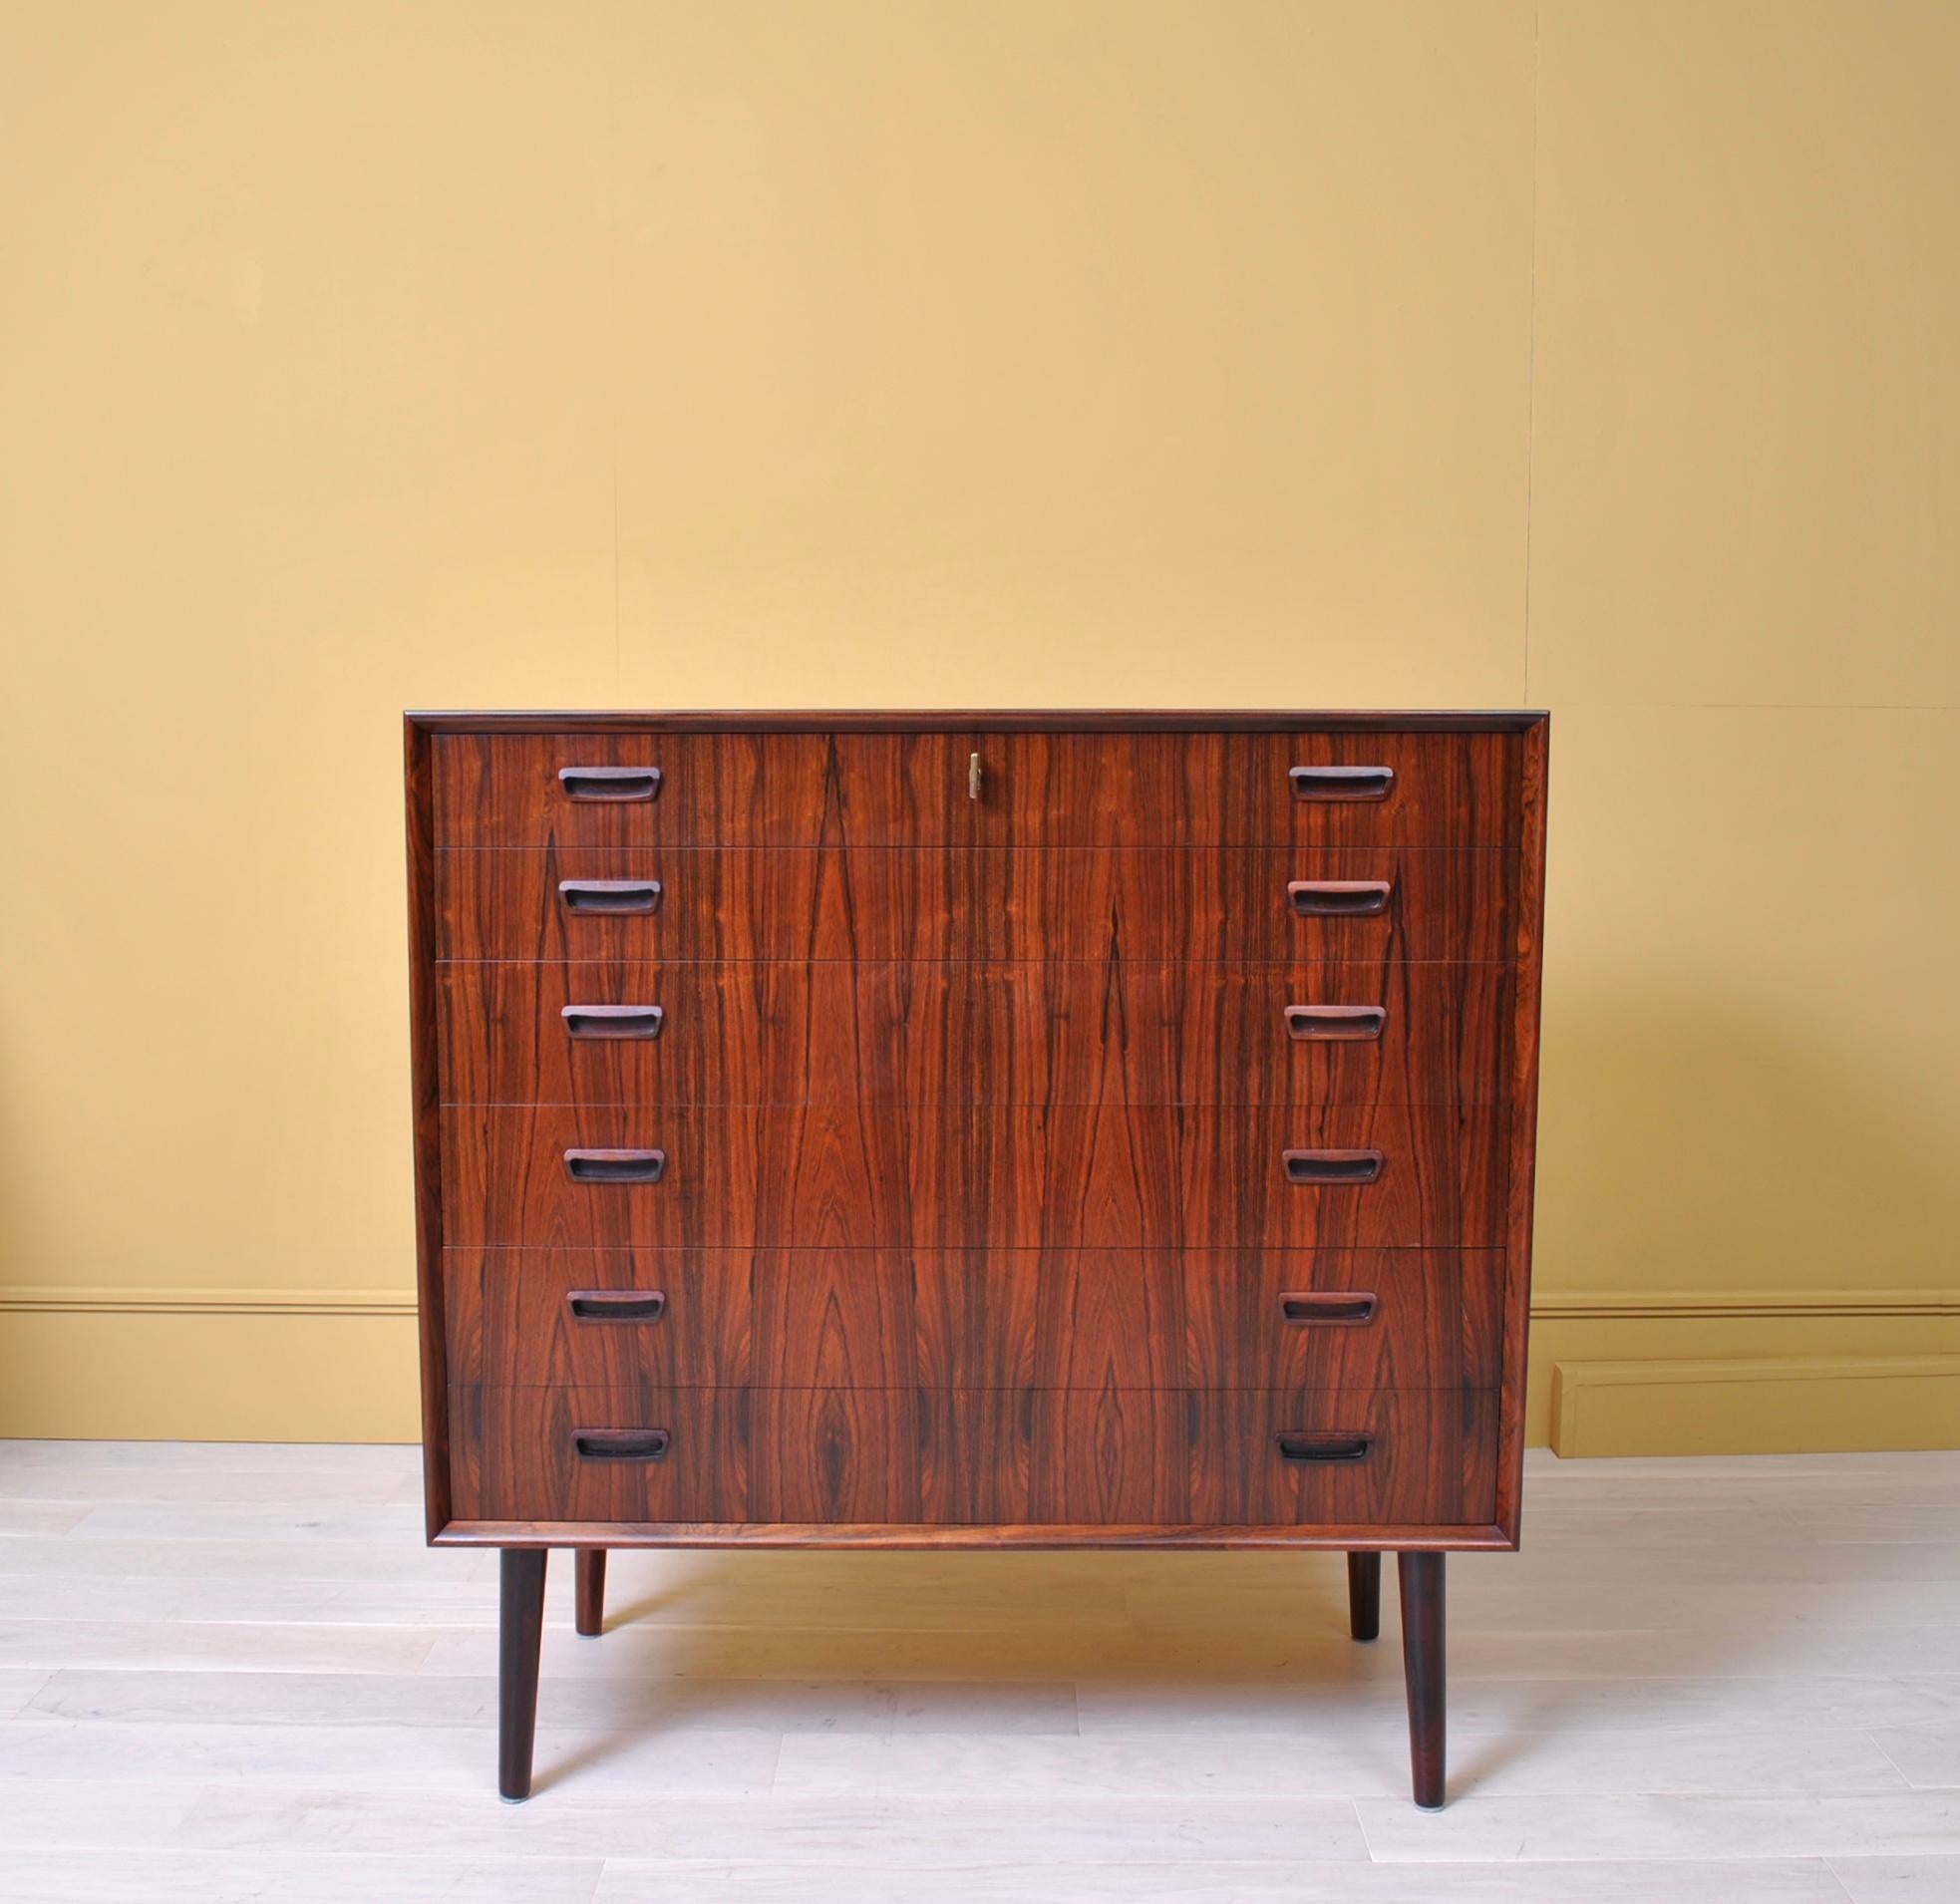 A large and very good quality Danish rosewood midcentury chest of drawers. Original key for lockable top drawer. Well made and very nicely conceived piece of Scandinavian Modern furniture.